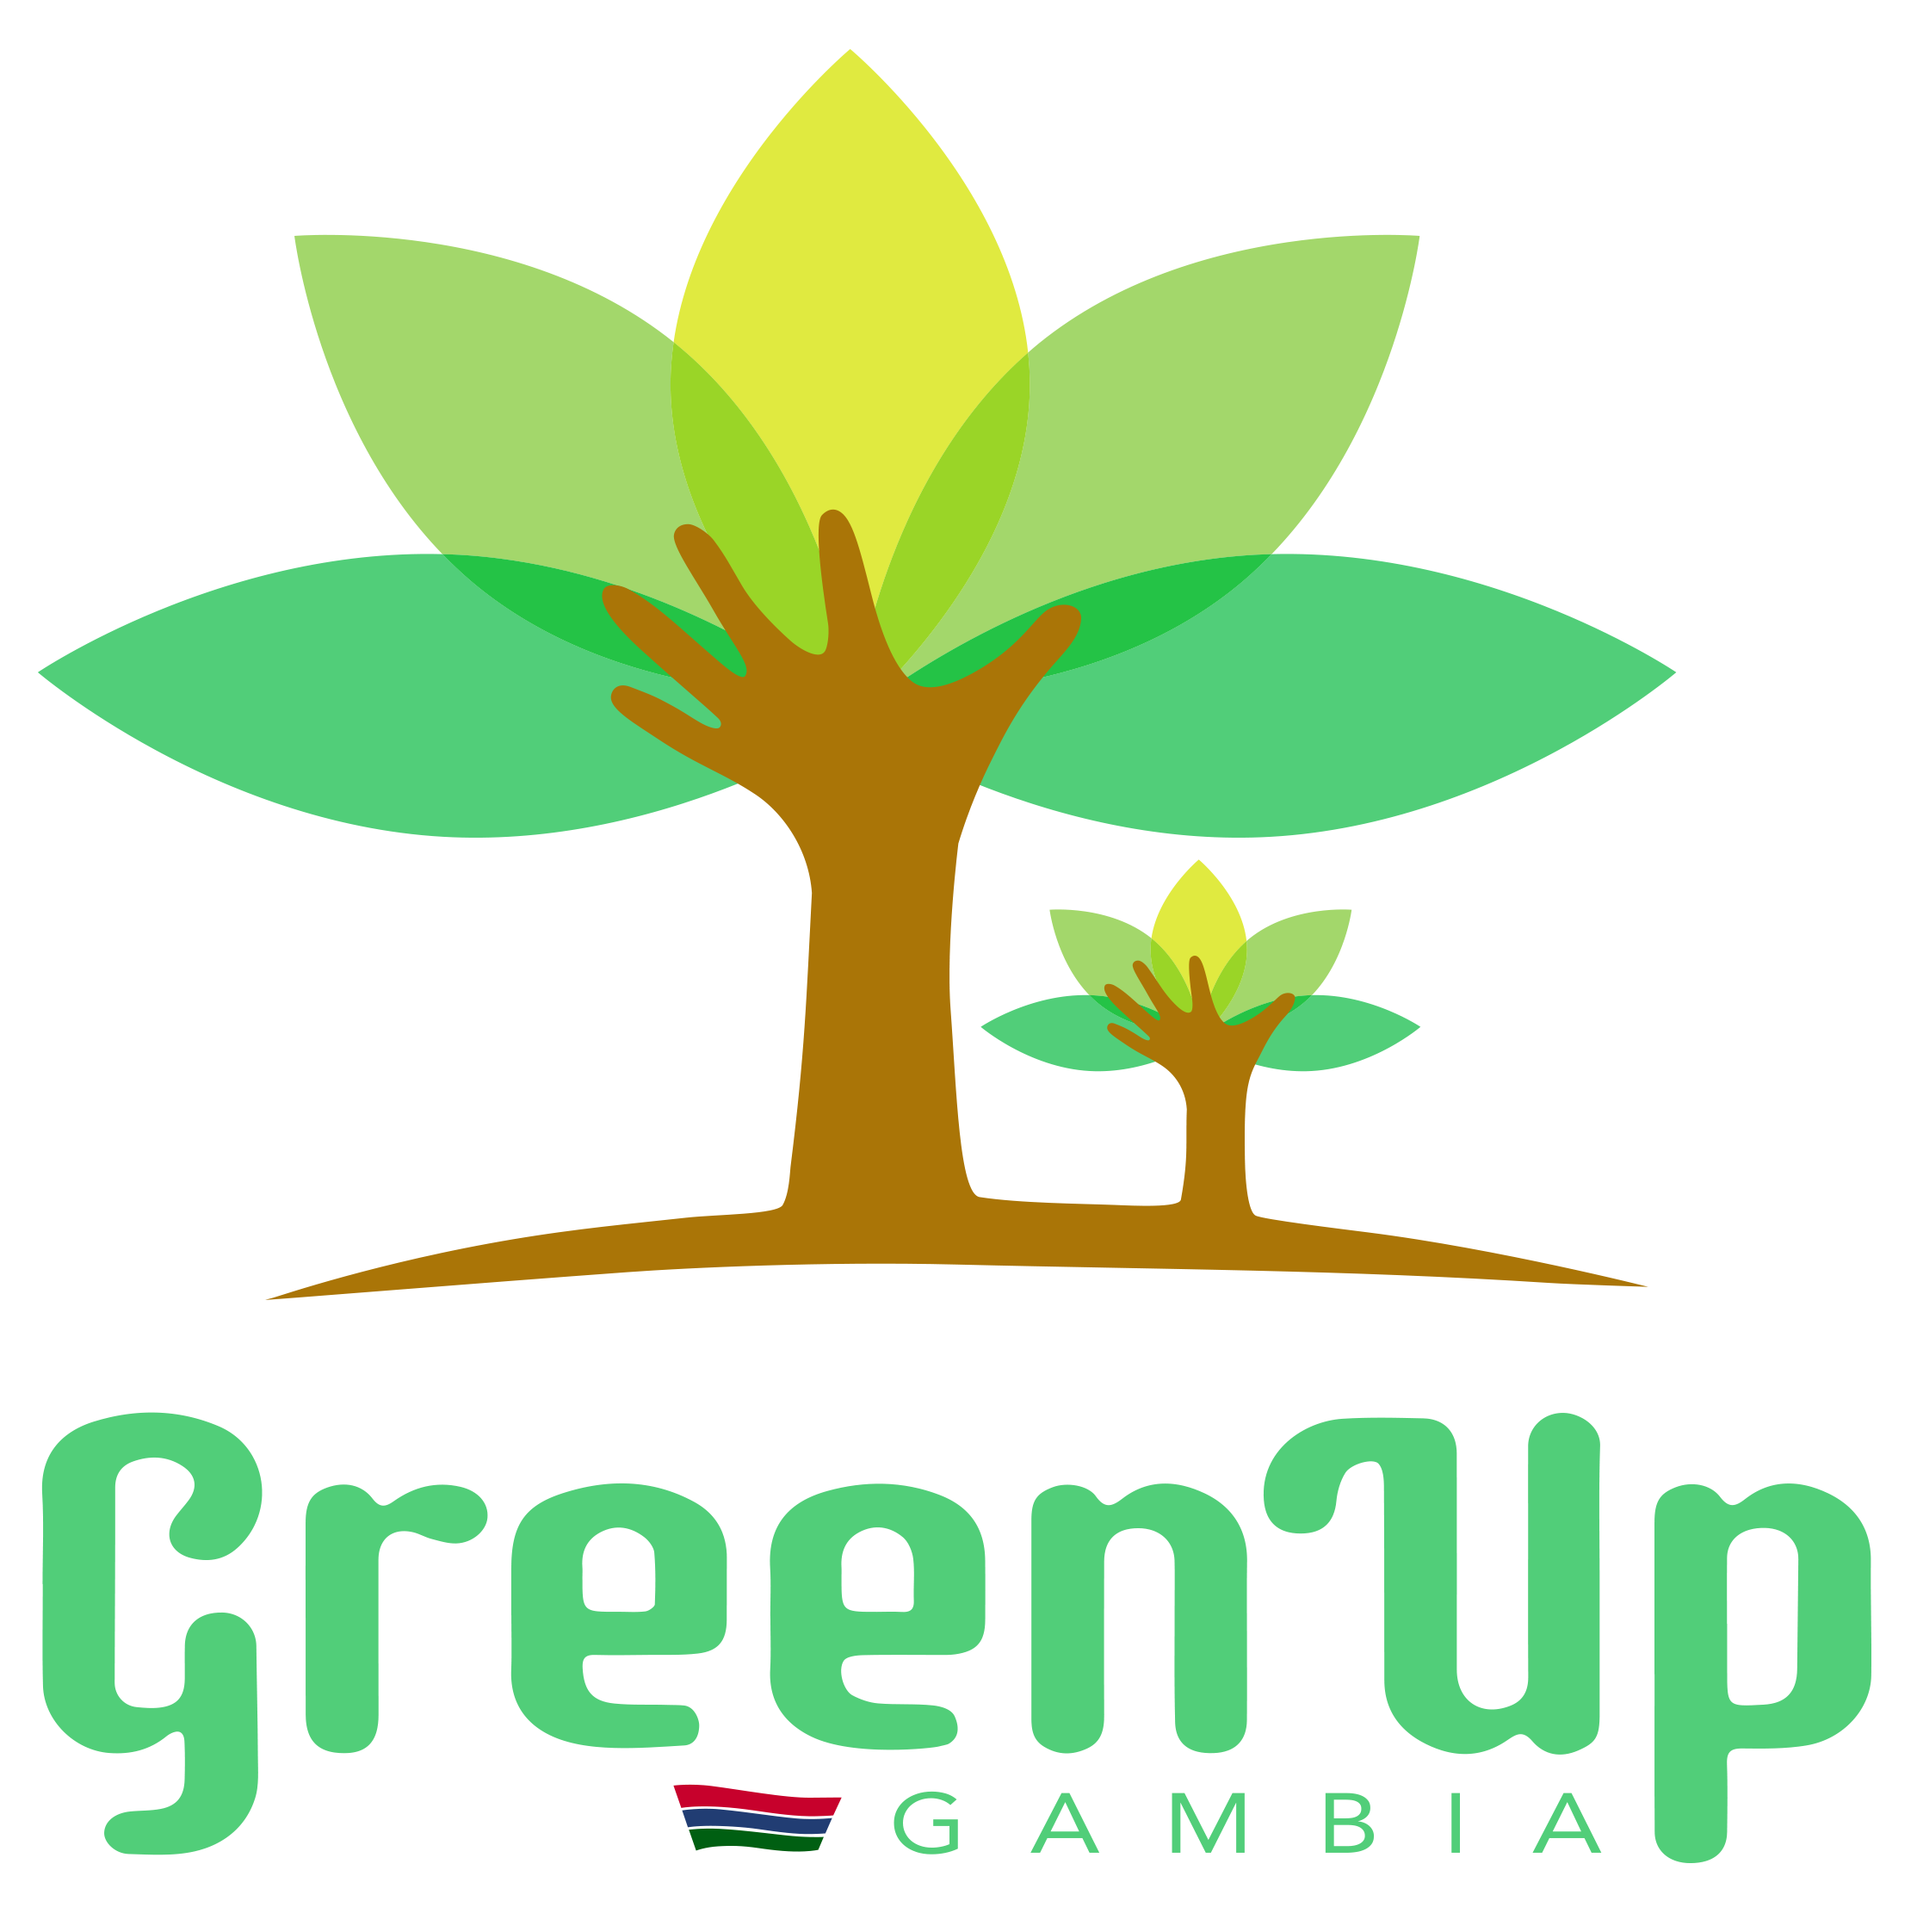 Green-Up Gambia